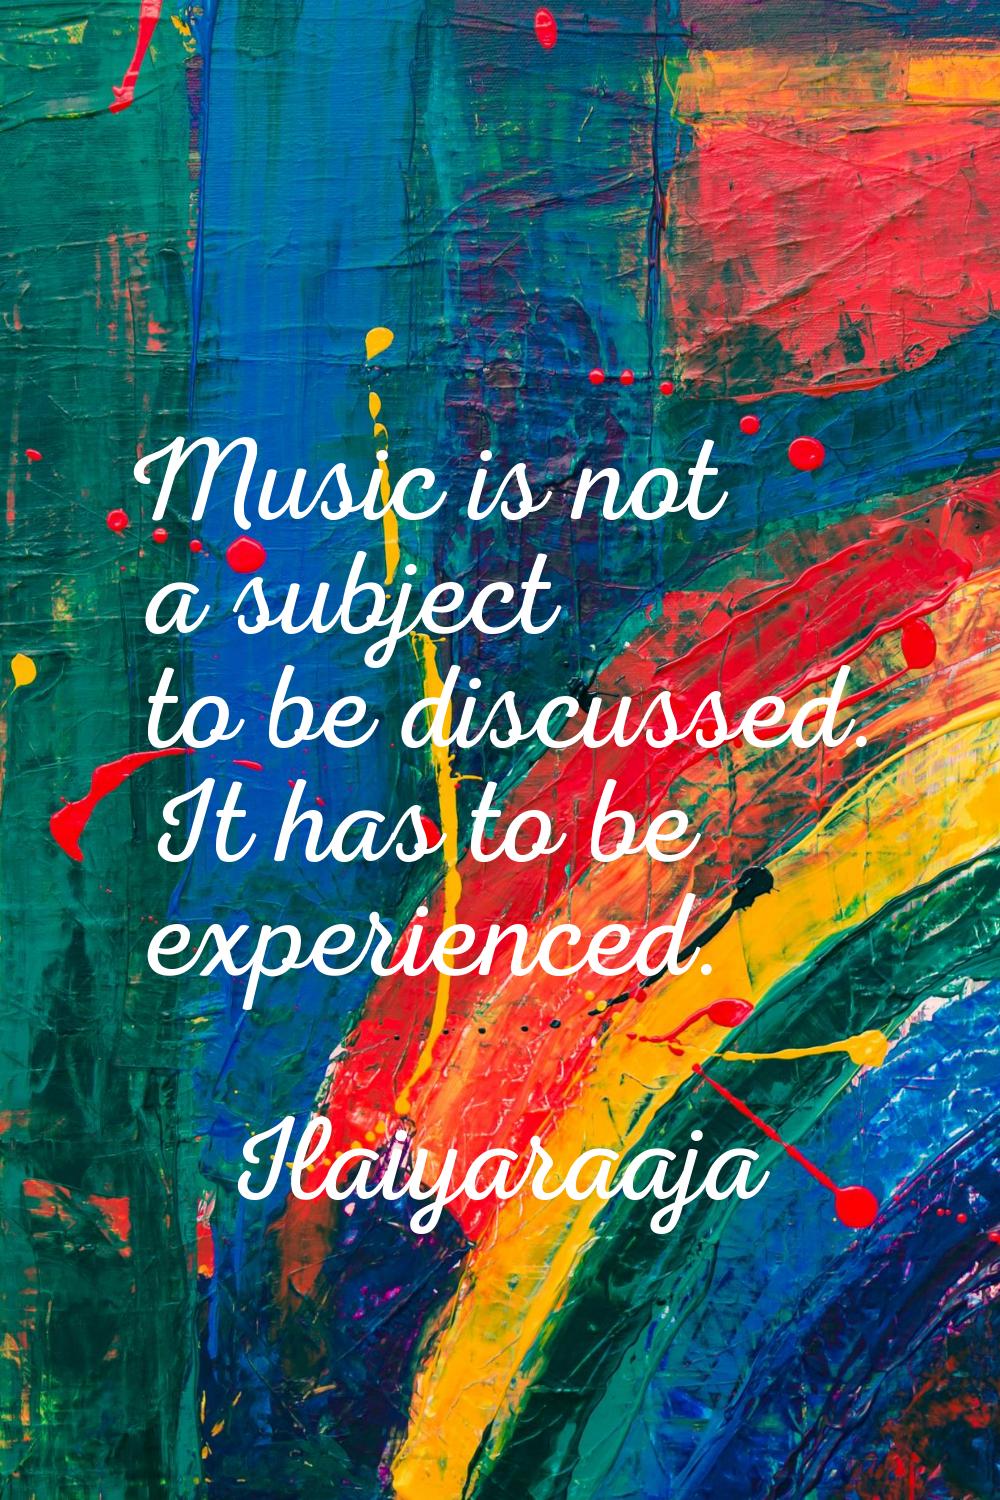 Music is not a subject to be discussed. It has to be experienced.